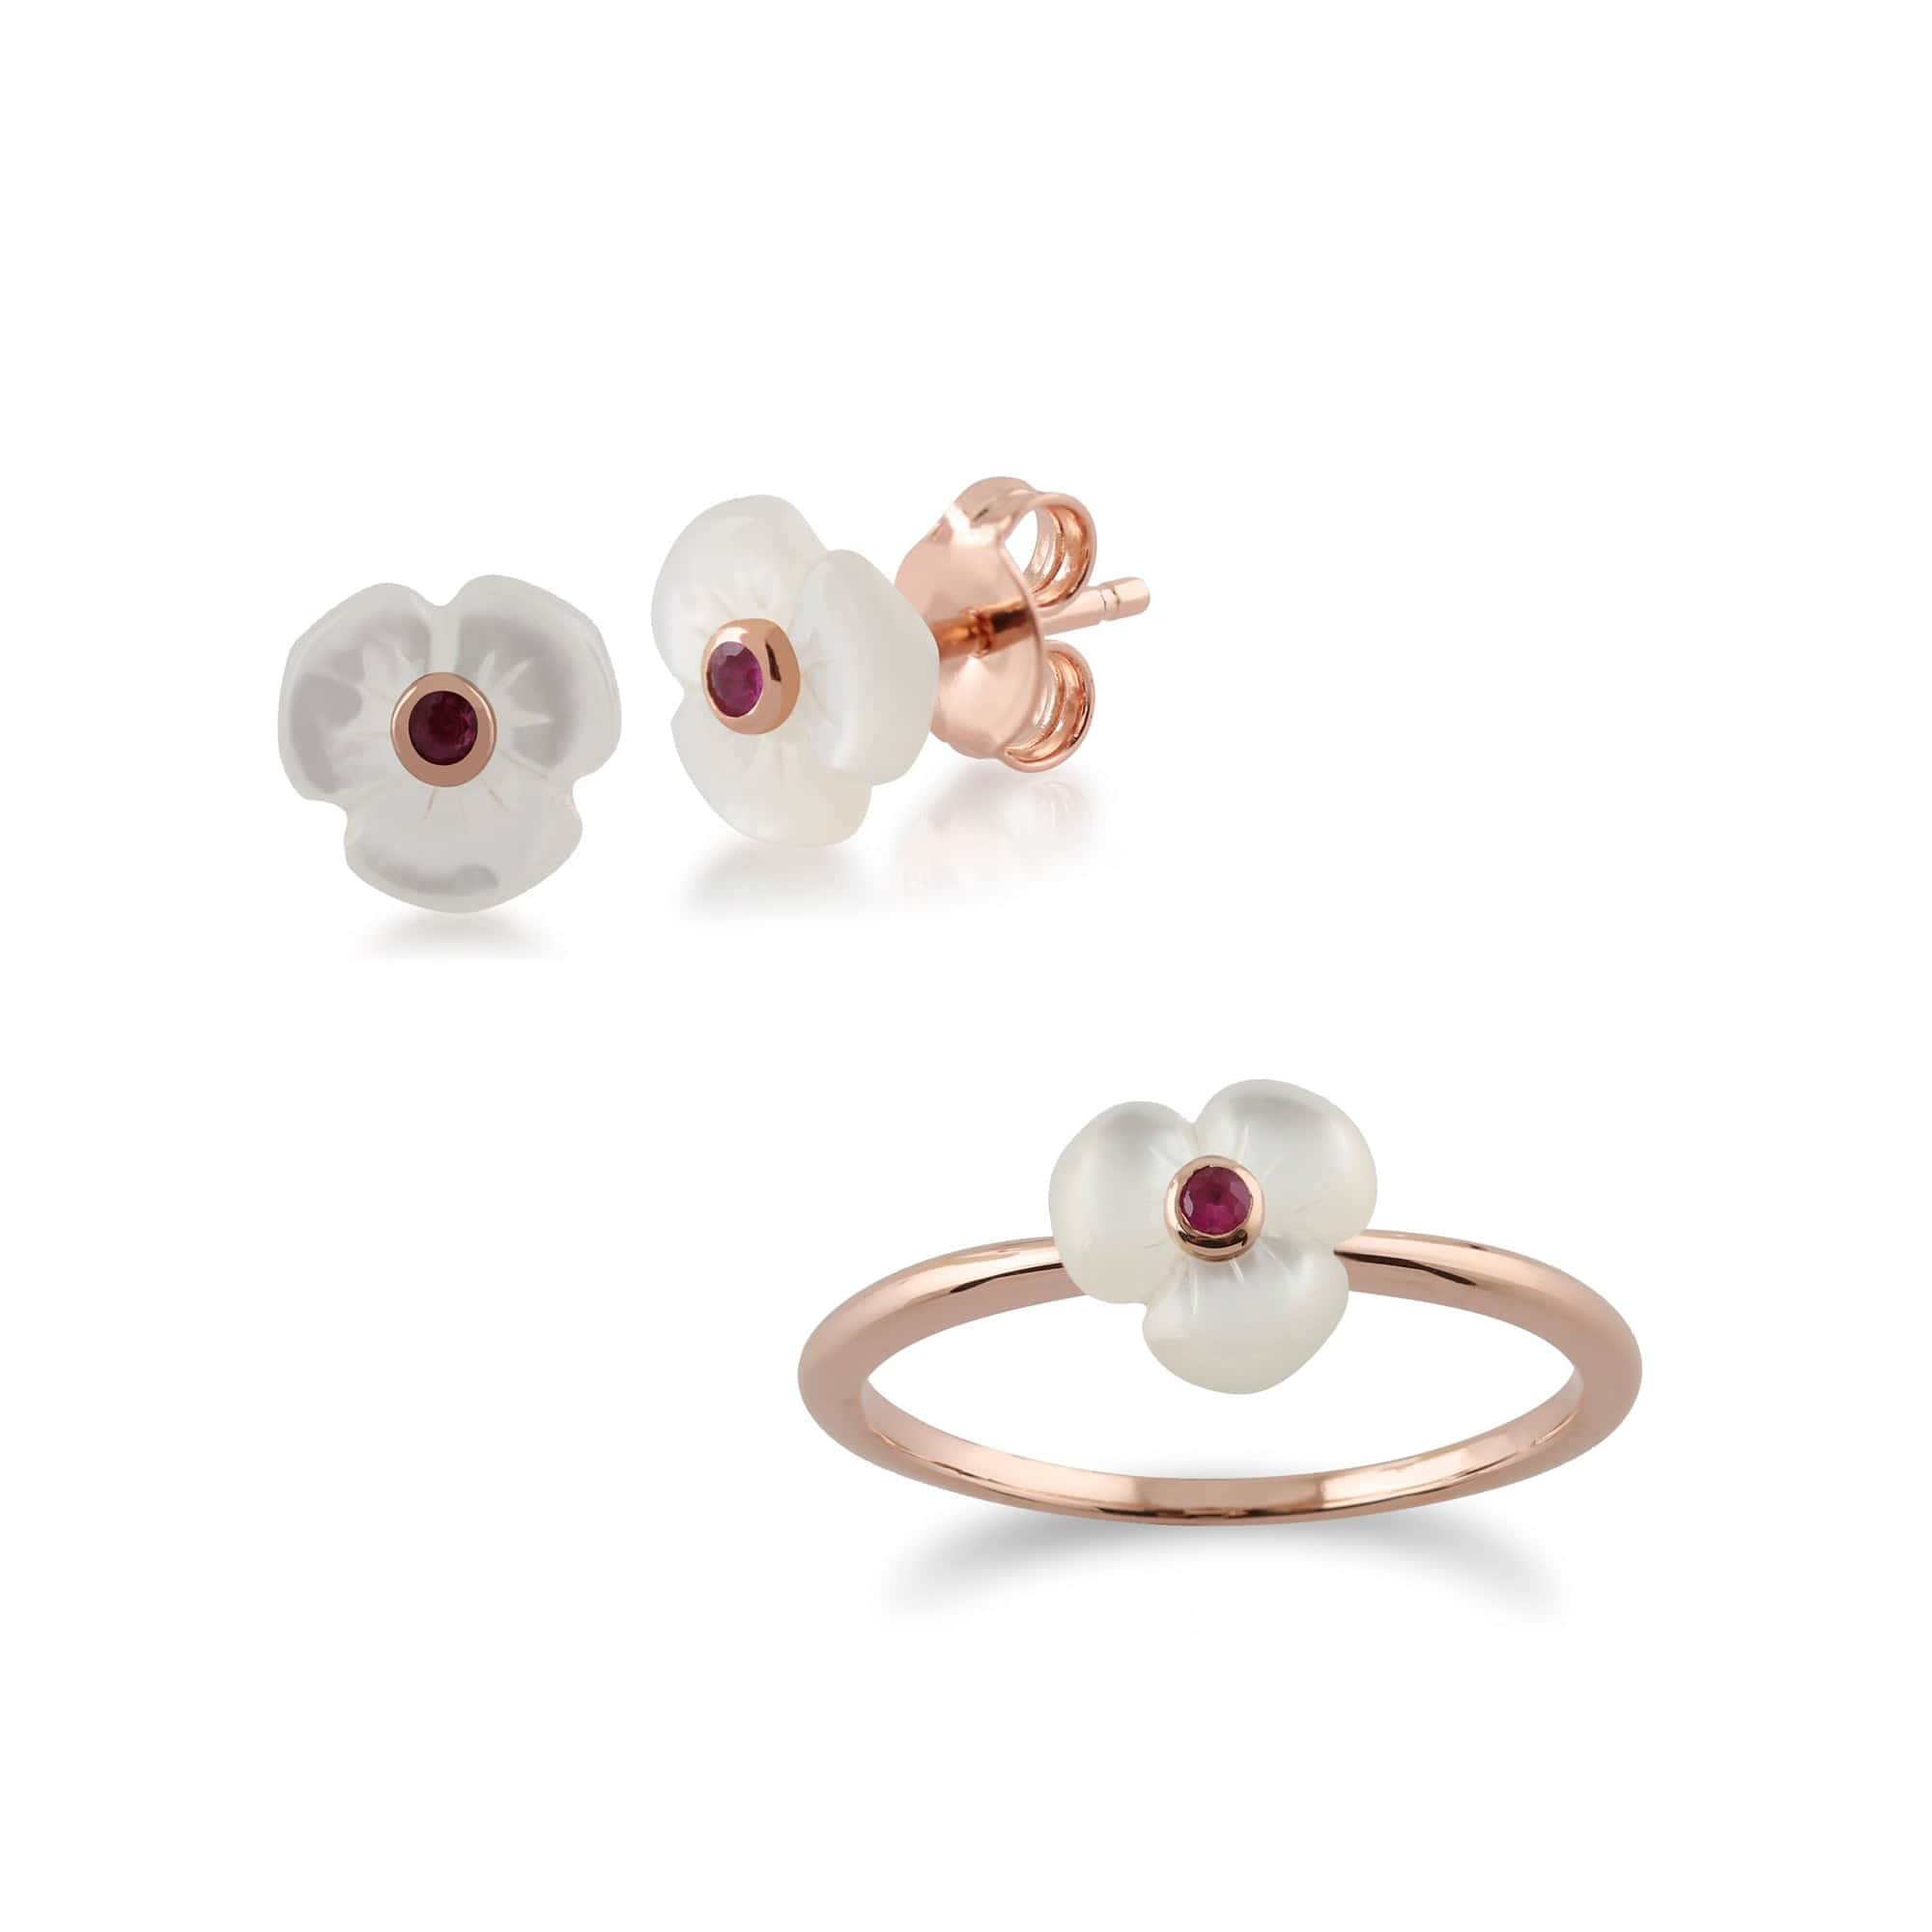 253E224101925-235R517101925 Floral Round Ruby & Mother of Pearl Poppy Stud Earrings & Ring Set in Rose Gold Plated 925 Sterling Silver 1